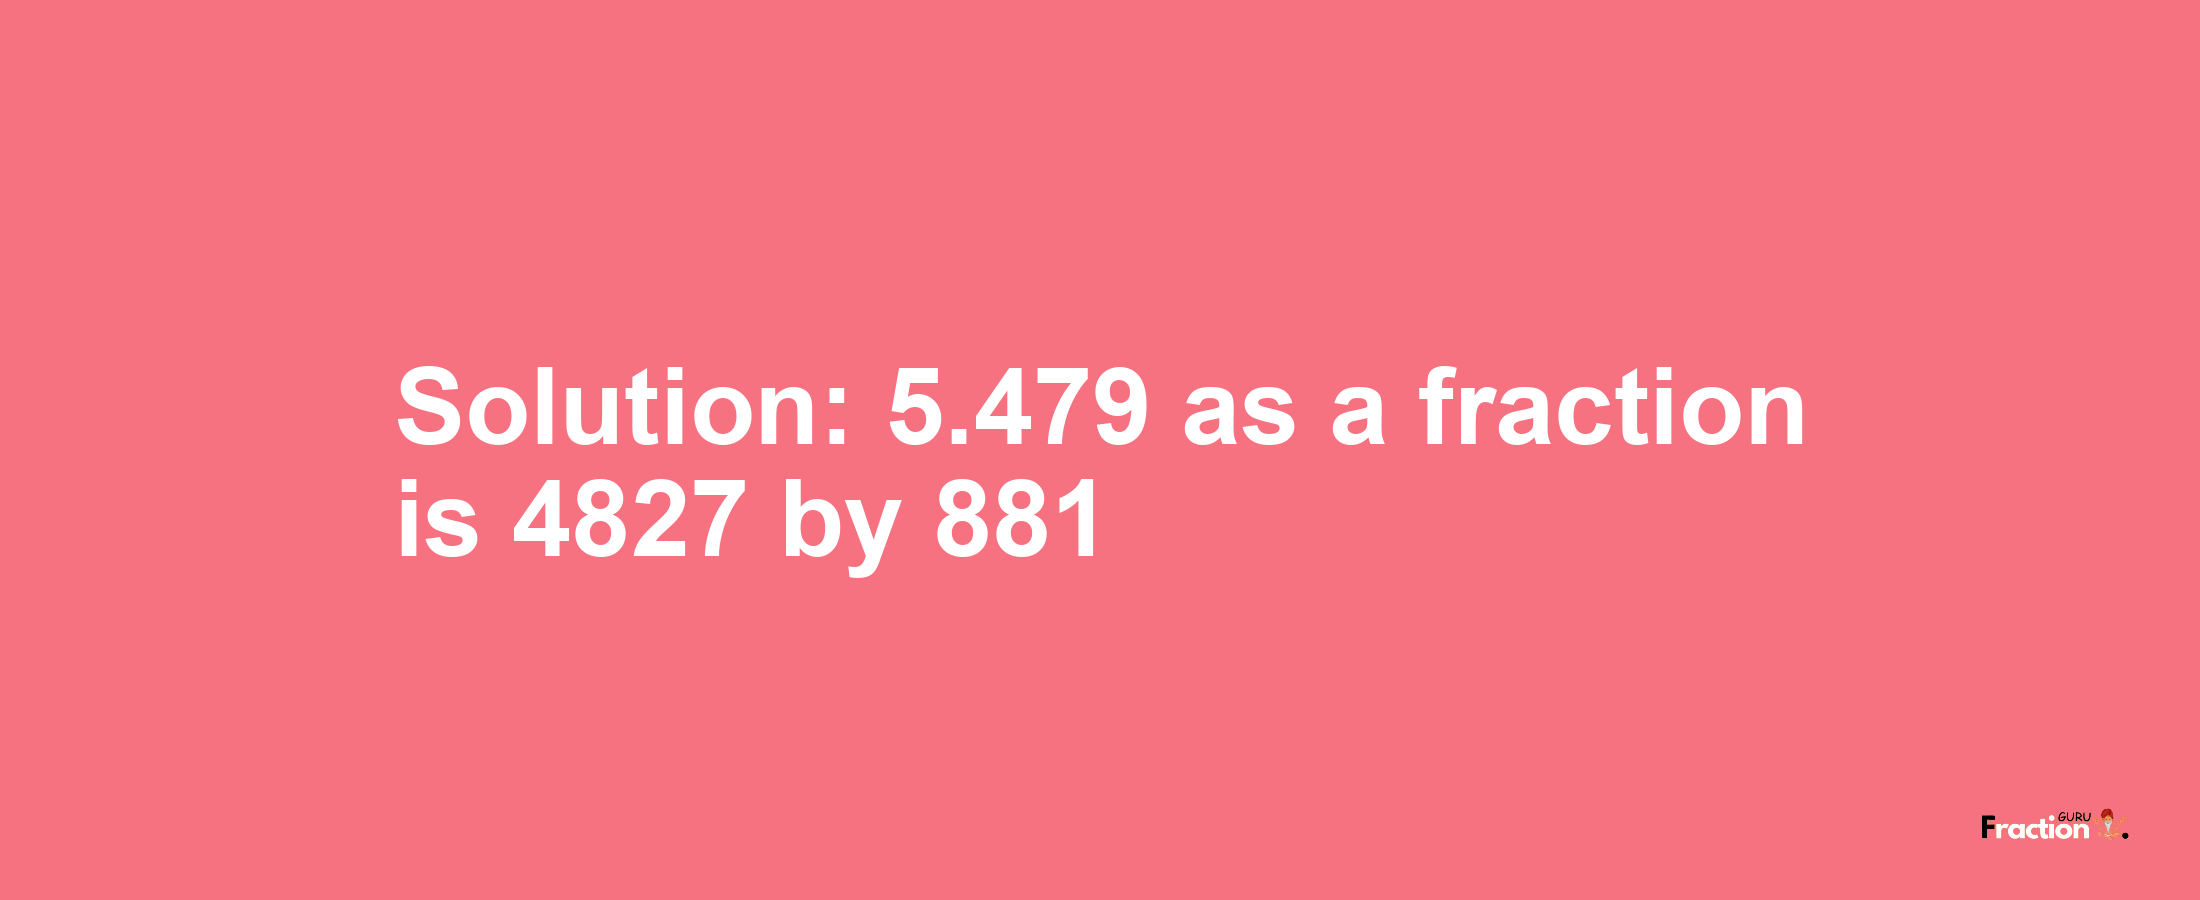 Solution:5.479 as a fraction is 4827/881